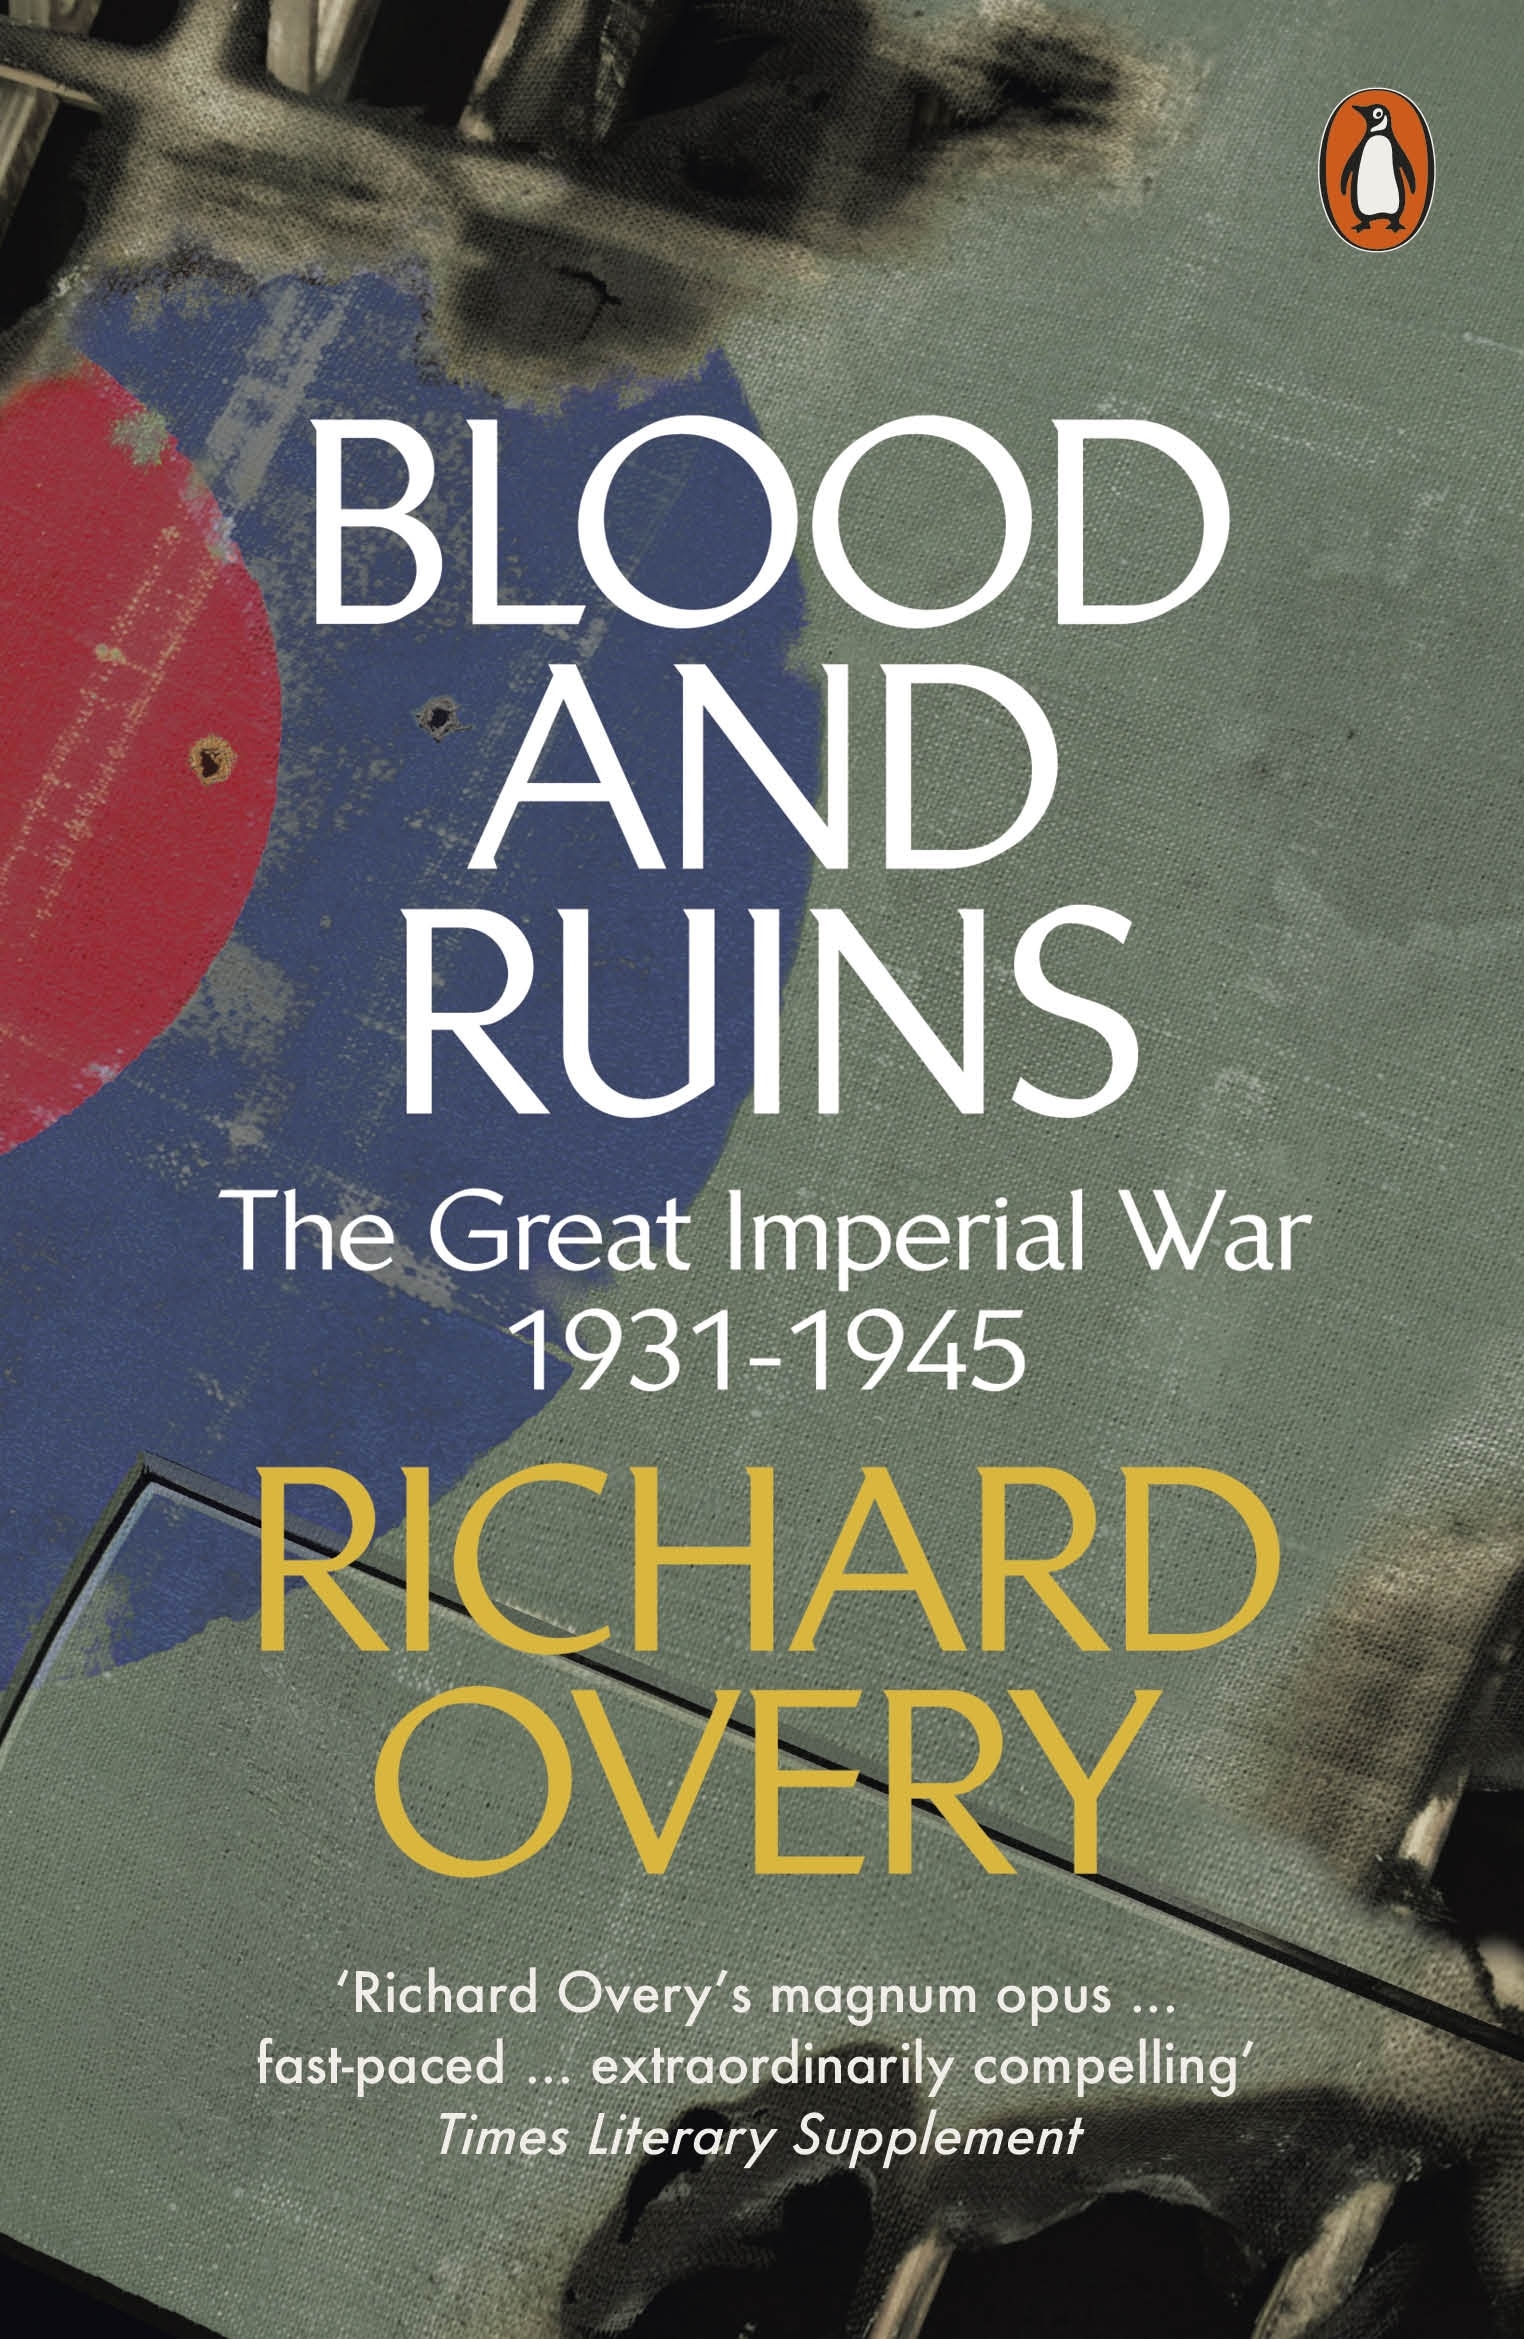 Book “Blood and Ruins” by Richard Overy — September 29, 2022